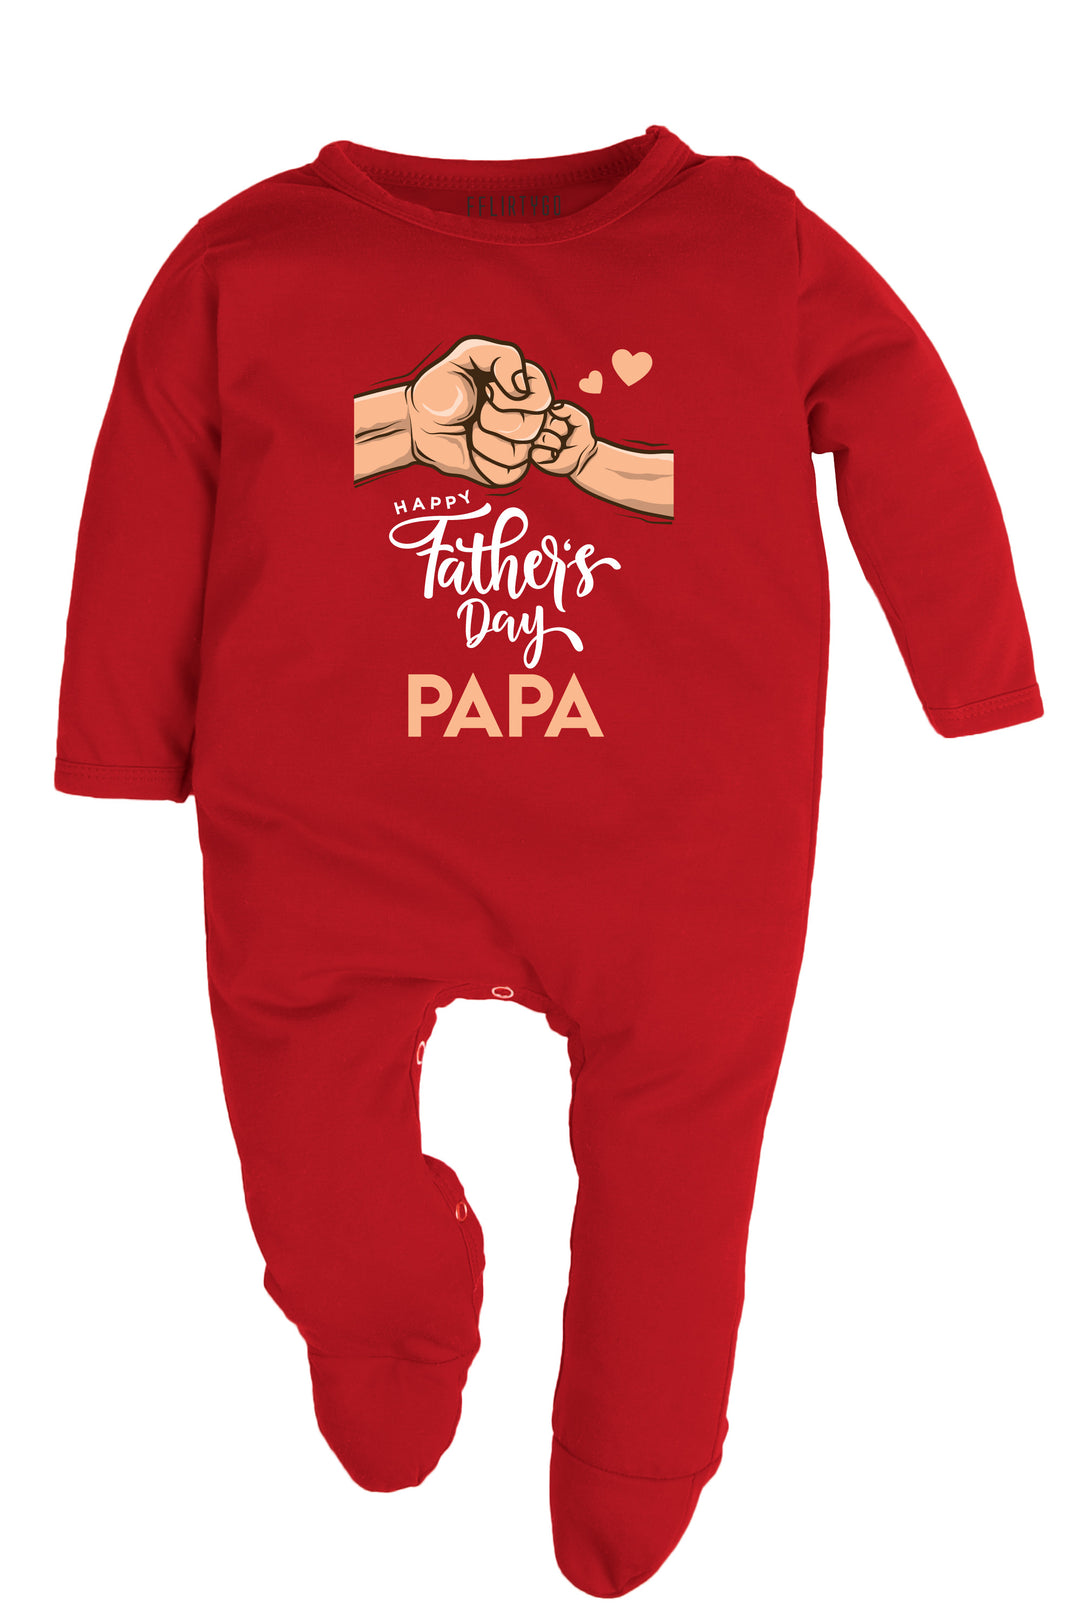 Happy Father's Day Papa Baby Romper | Onesies